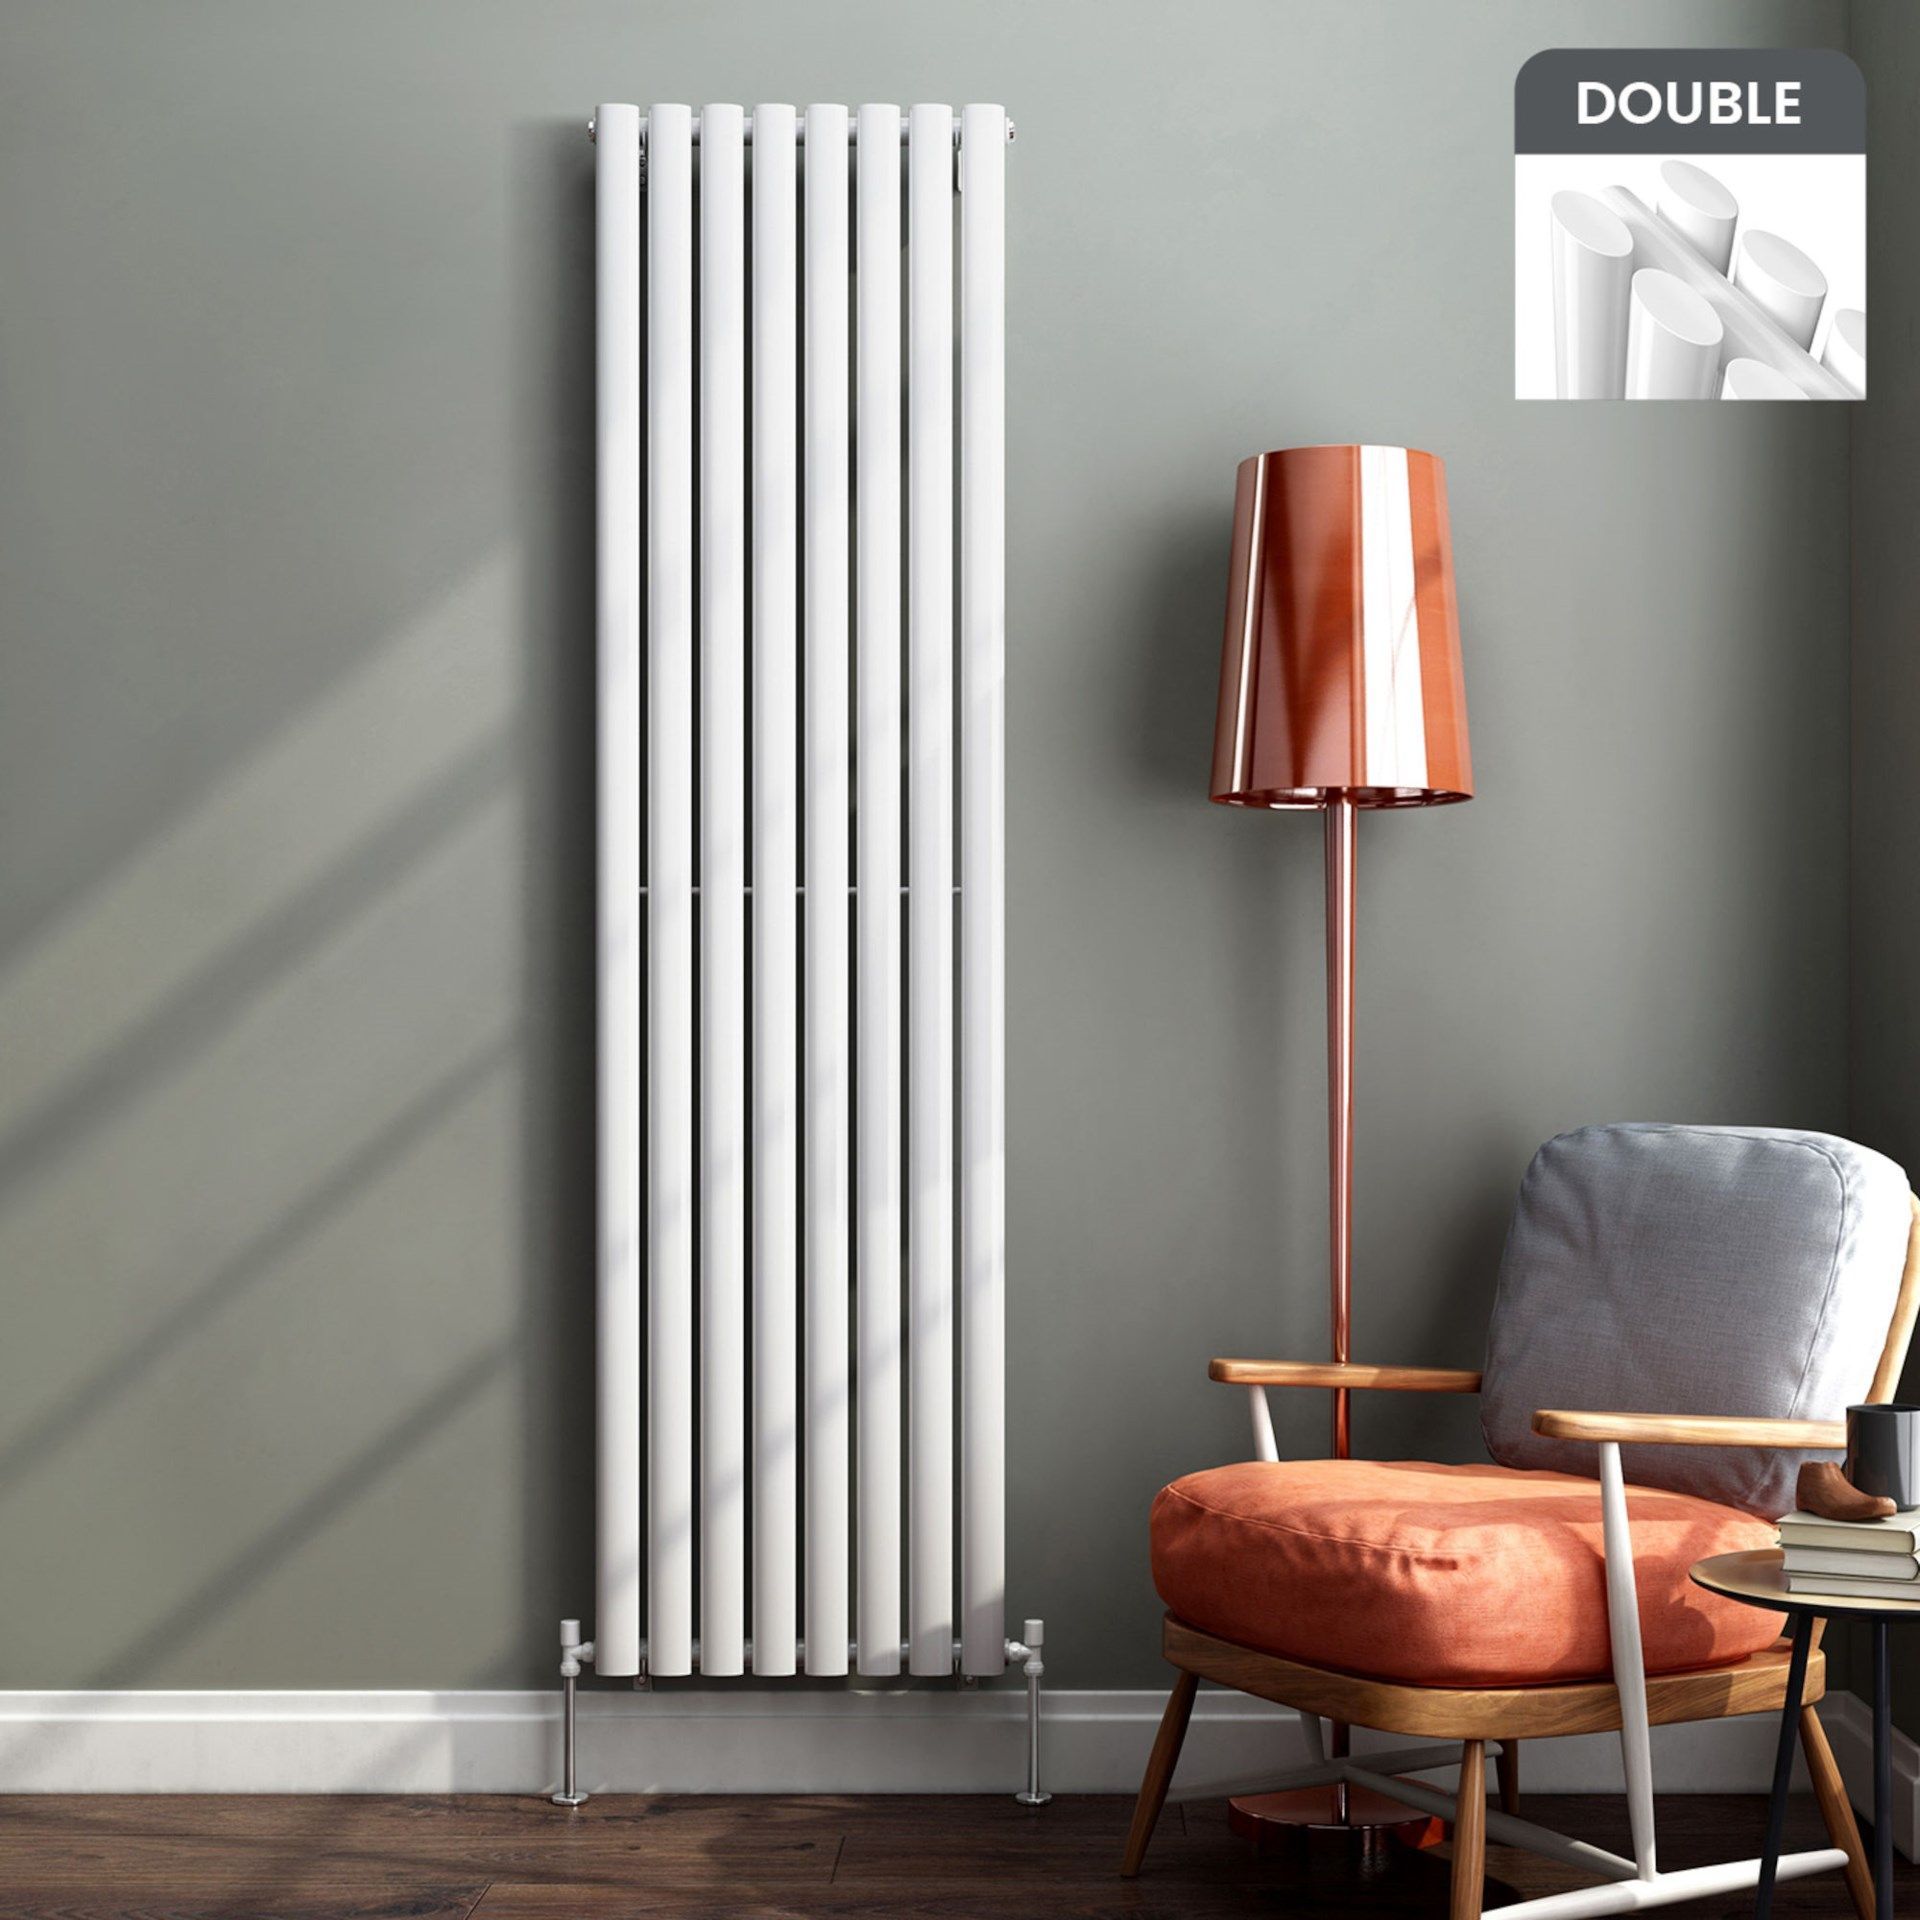 1800x480mm Gloss White Double Oval Tube Vertical Radiator.RRP £499.99.Made from high quality low